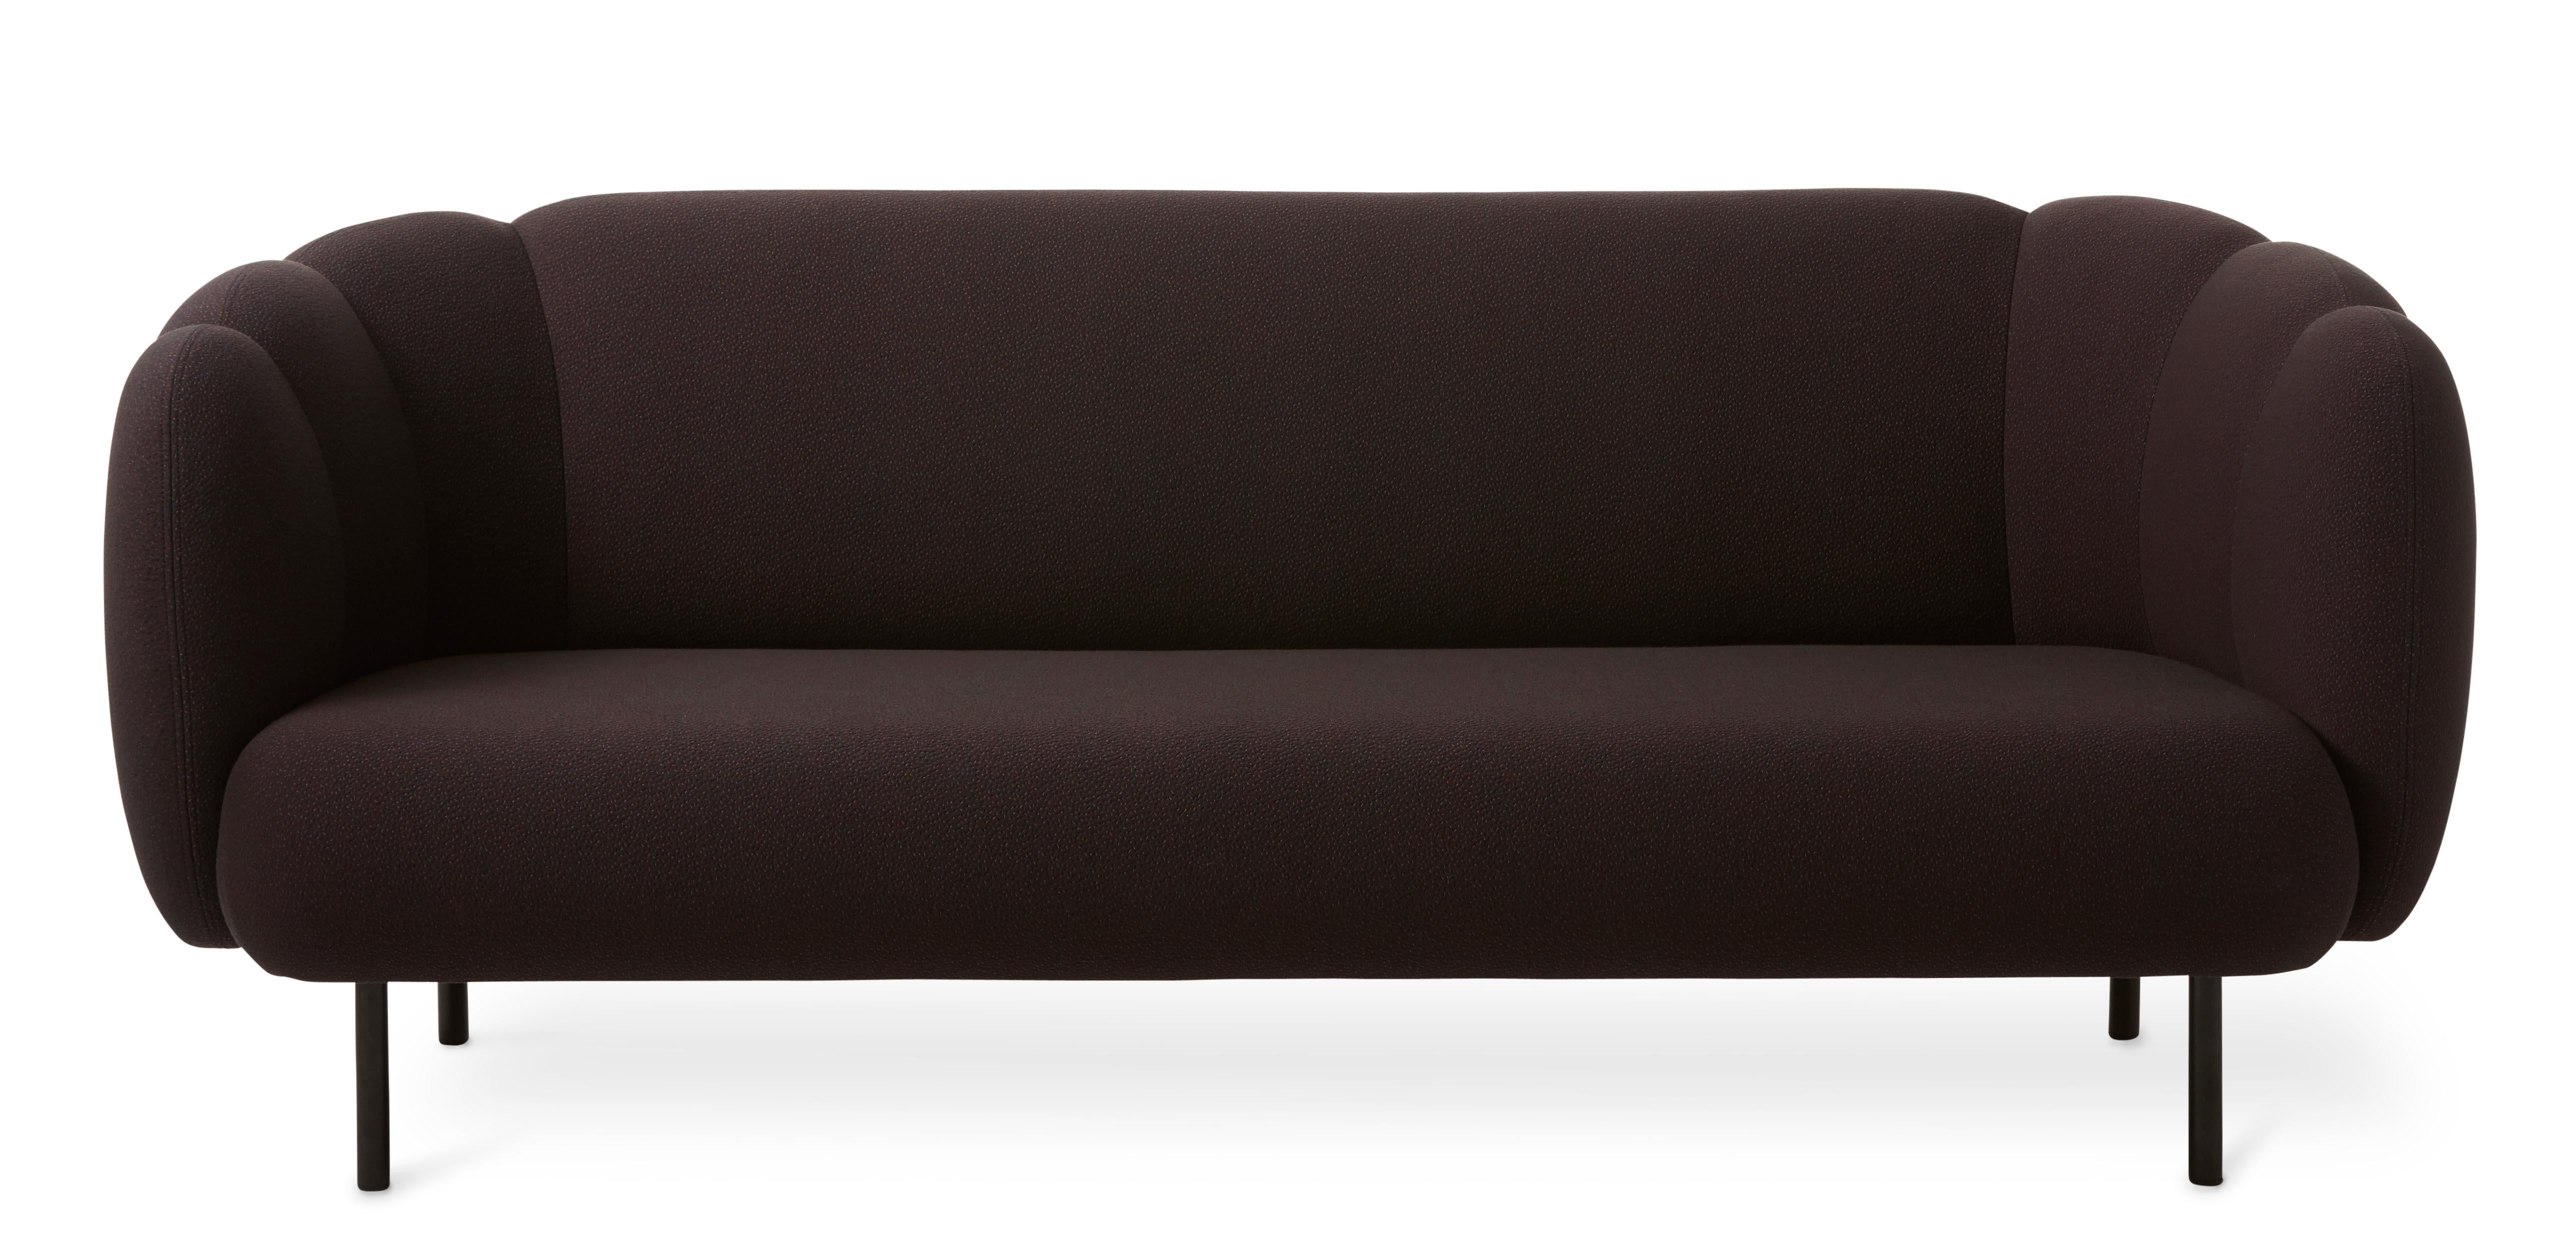 For Sale: Purple (Sprinkles 694) Cape 3-Seat Stitch Sofa, by Charlotte Høncke from Warm Nordic